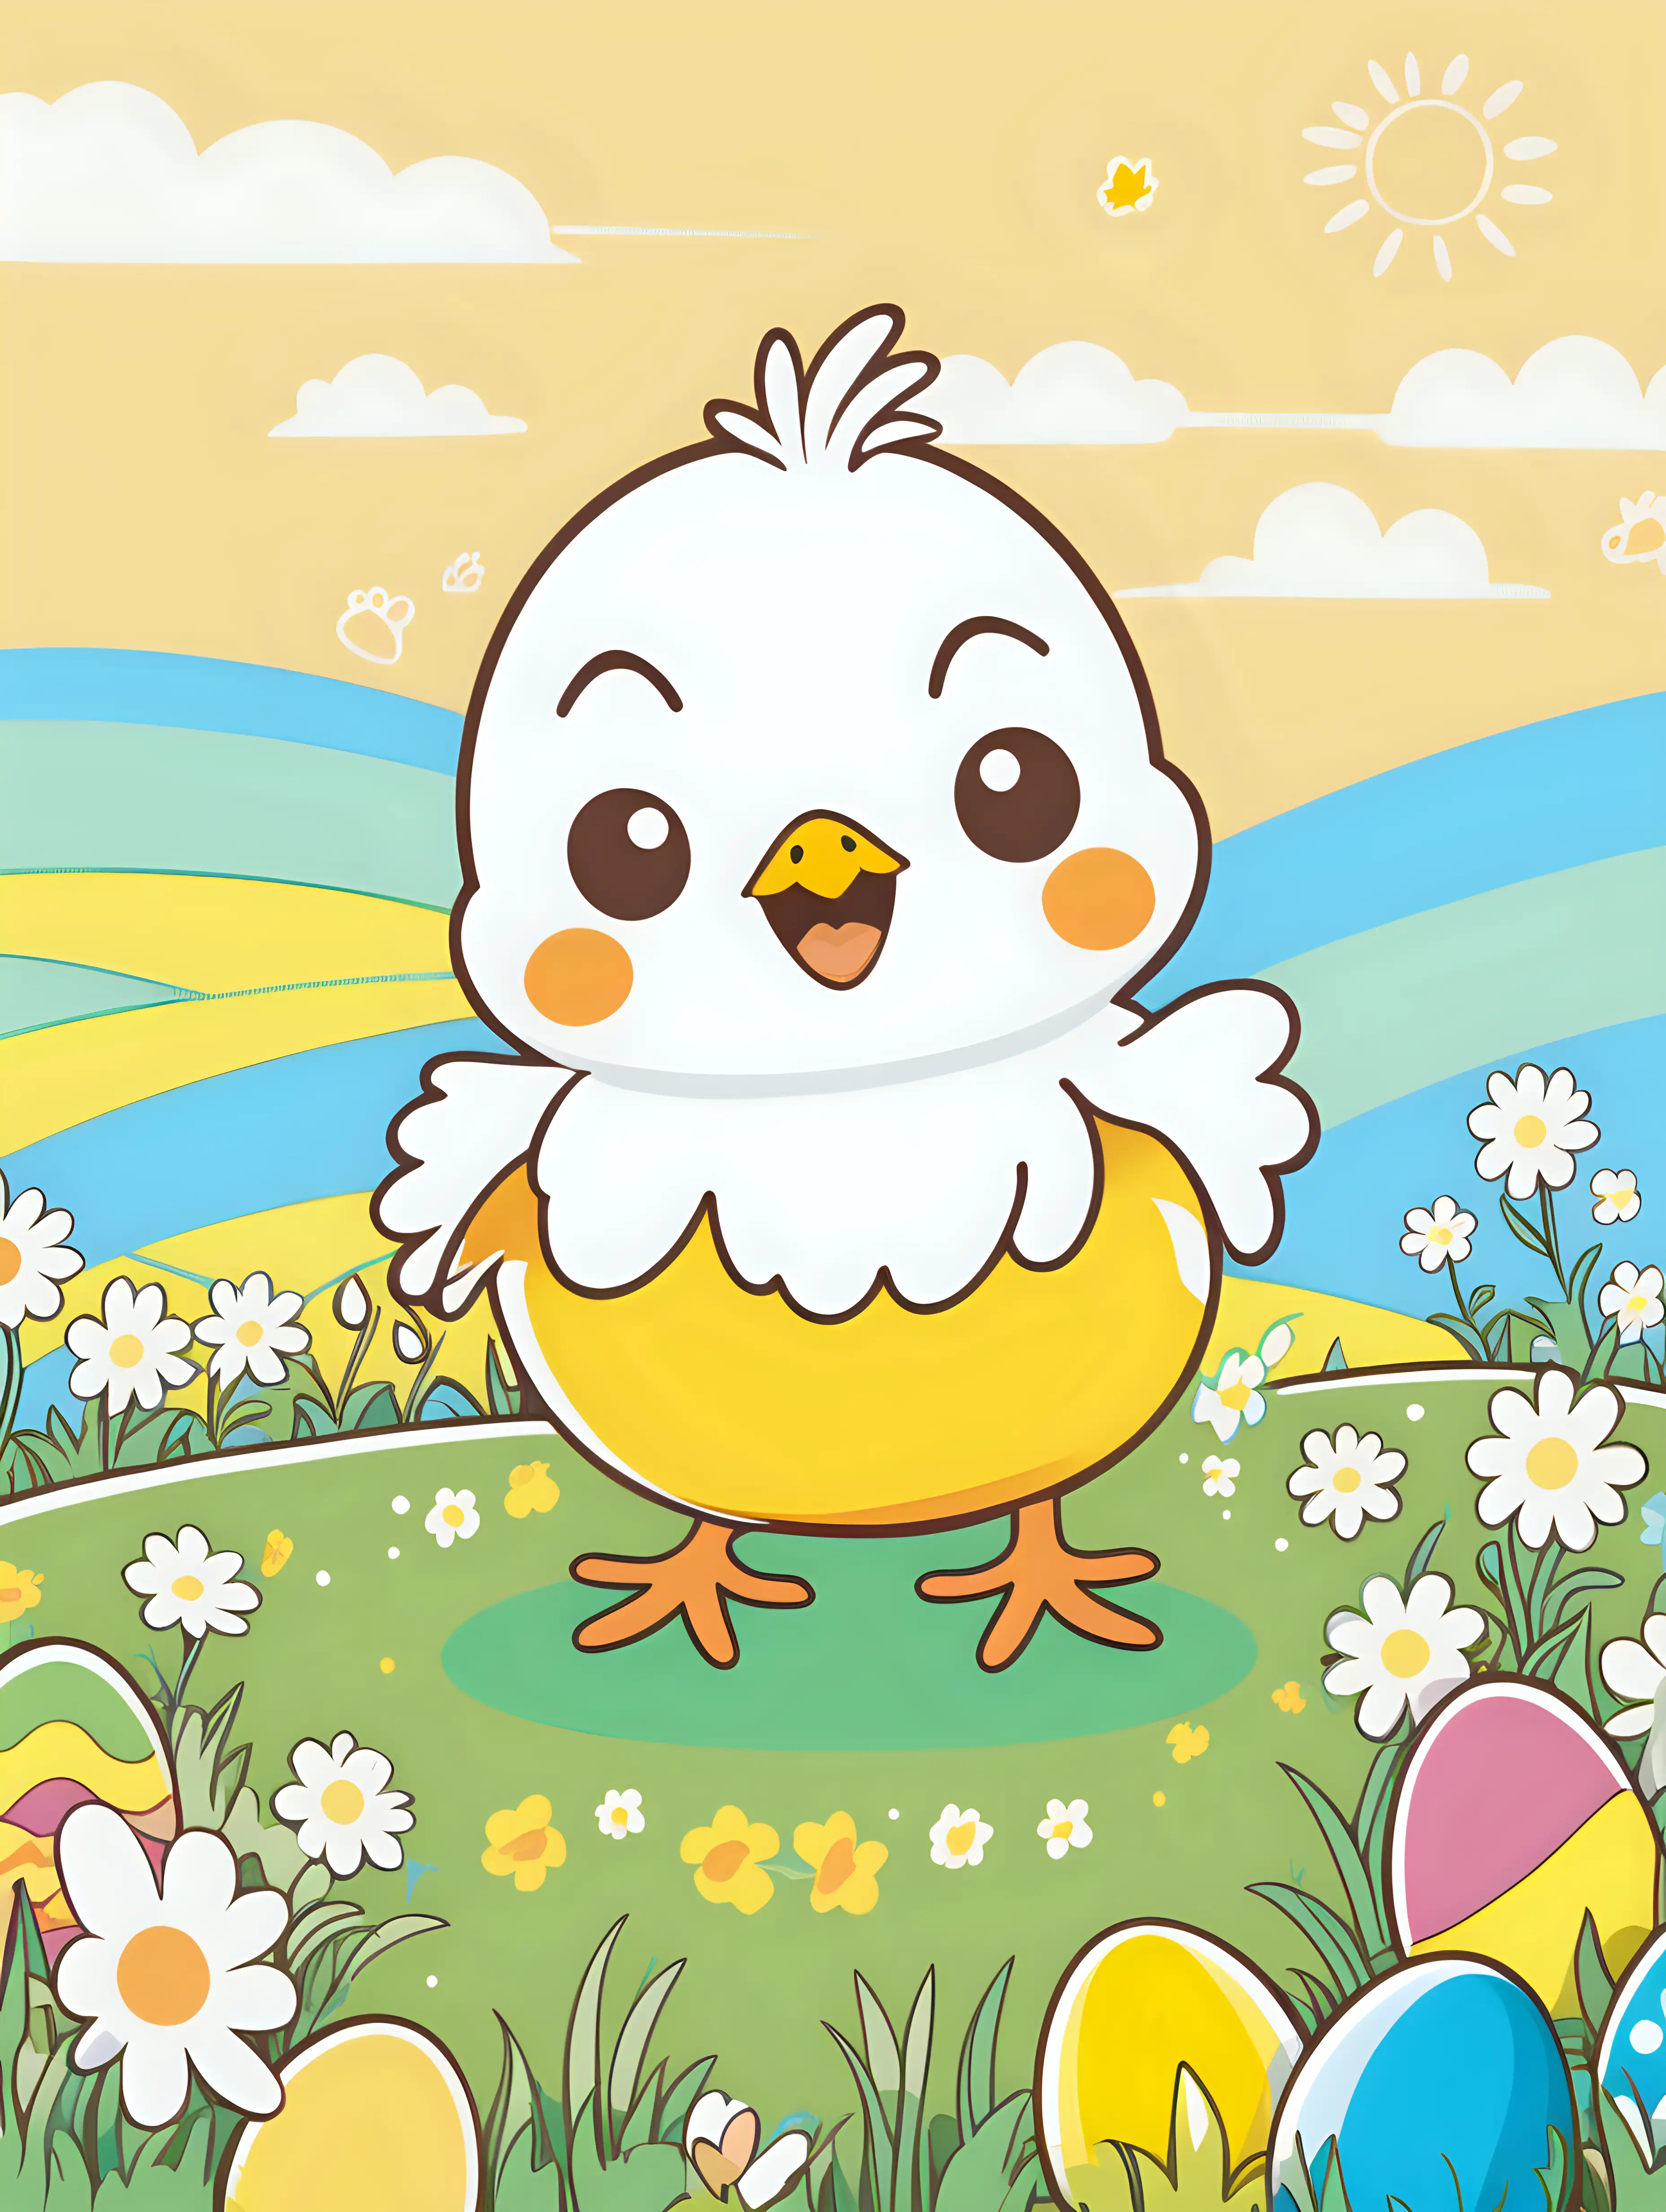 Cheerful Kawaii Baby Chick in Vibrant Easter Spring Field